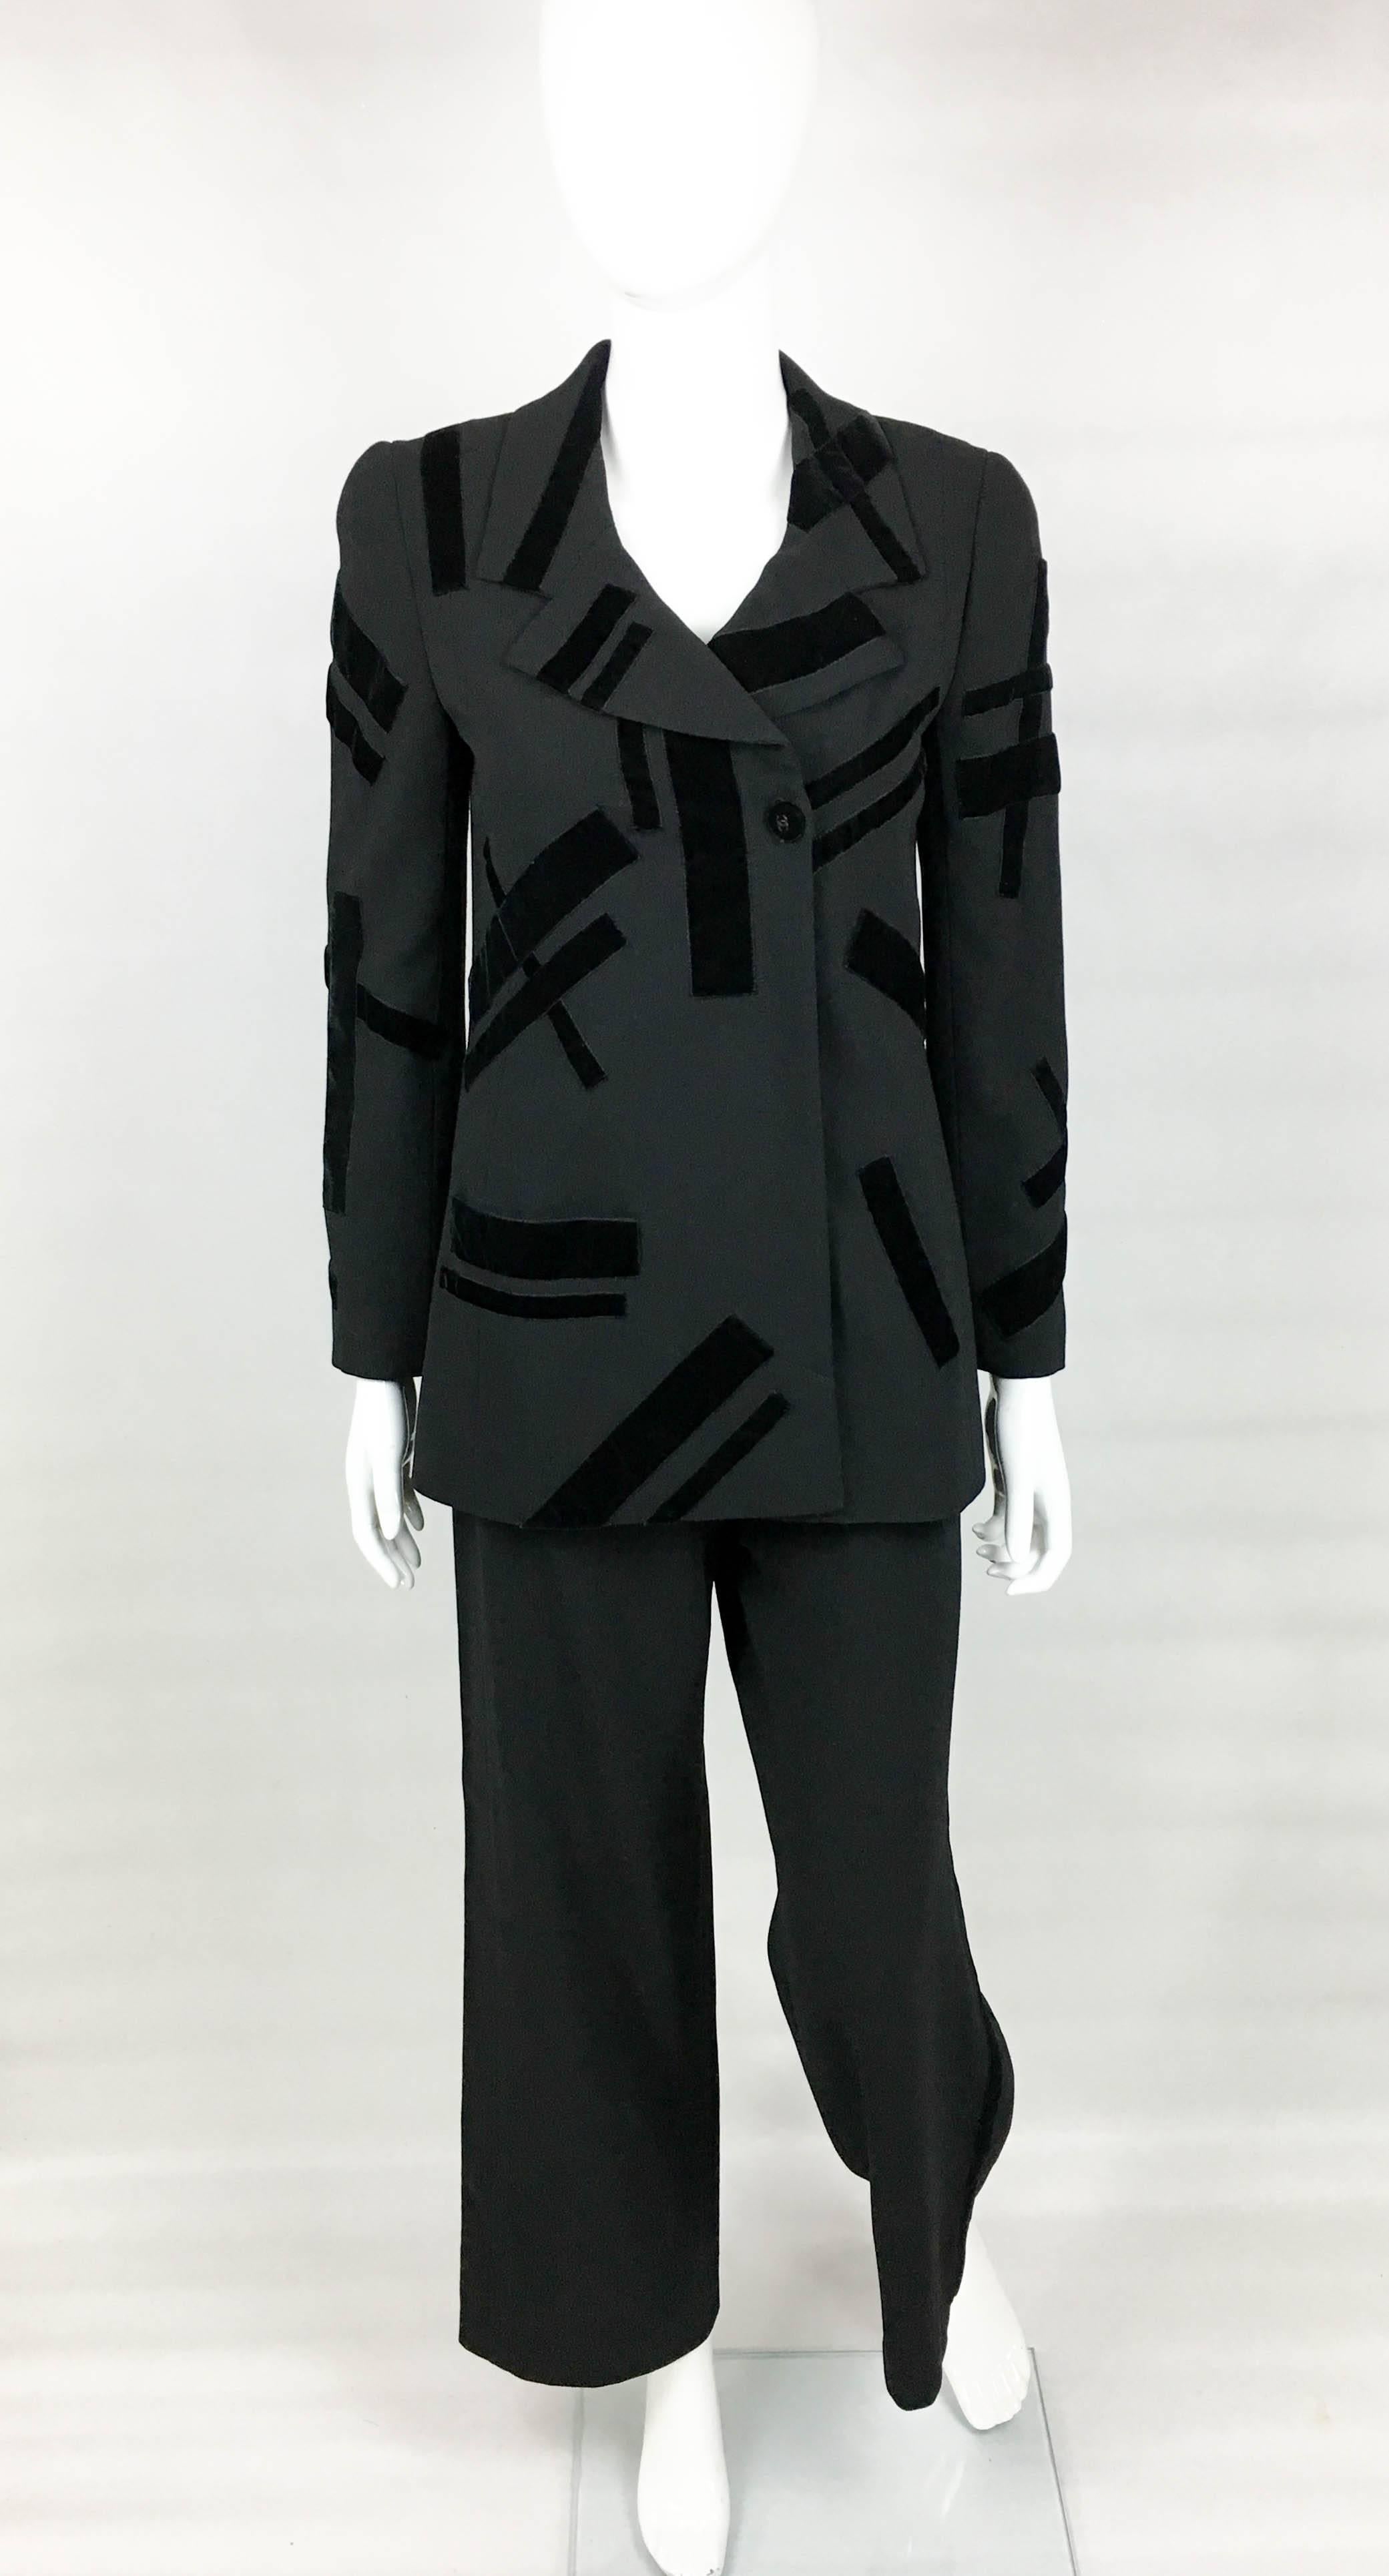 Vintage Chanel Black Trouser Suit with Velvet Details. This stylish suit by Chanel dates back from 1998. Made in light wool, it is lined in silk. The jacket is lined in silk, has two pockets and various geometrically shaped velvet details. The